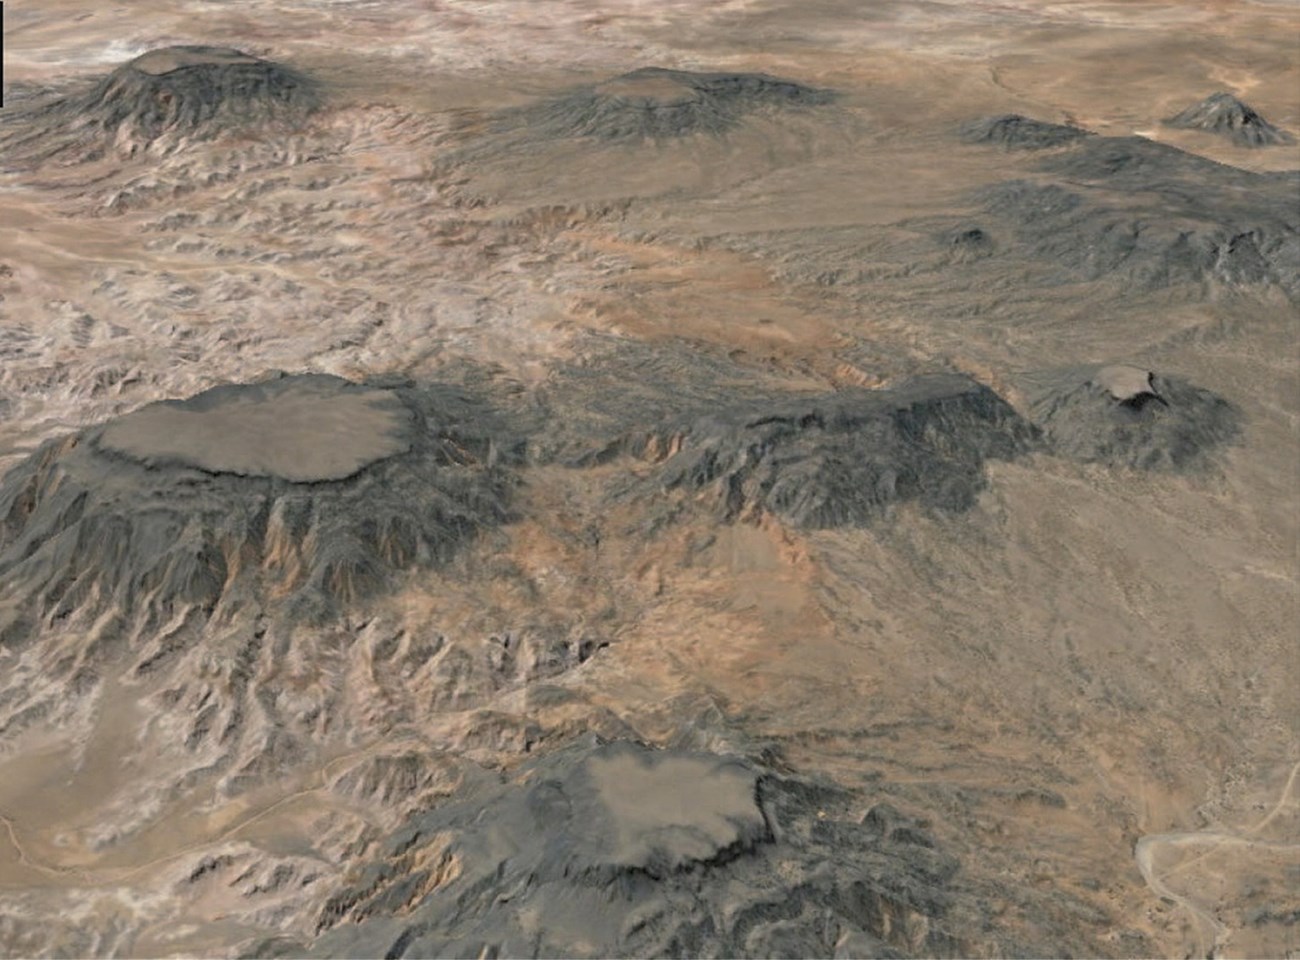 oblique aerial photo of a desert landscape with several mesas